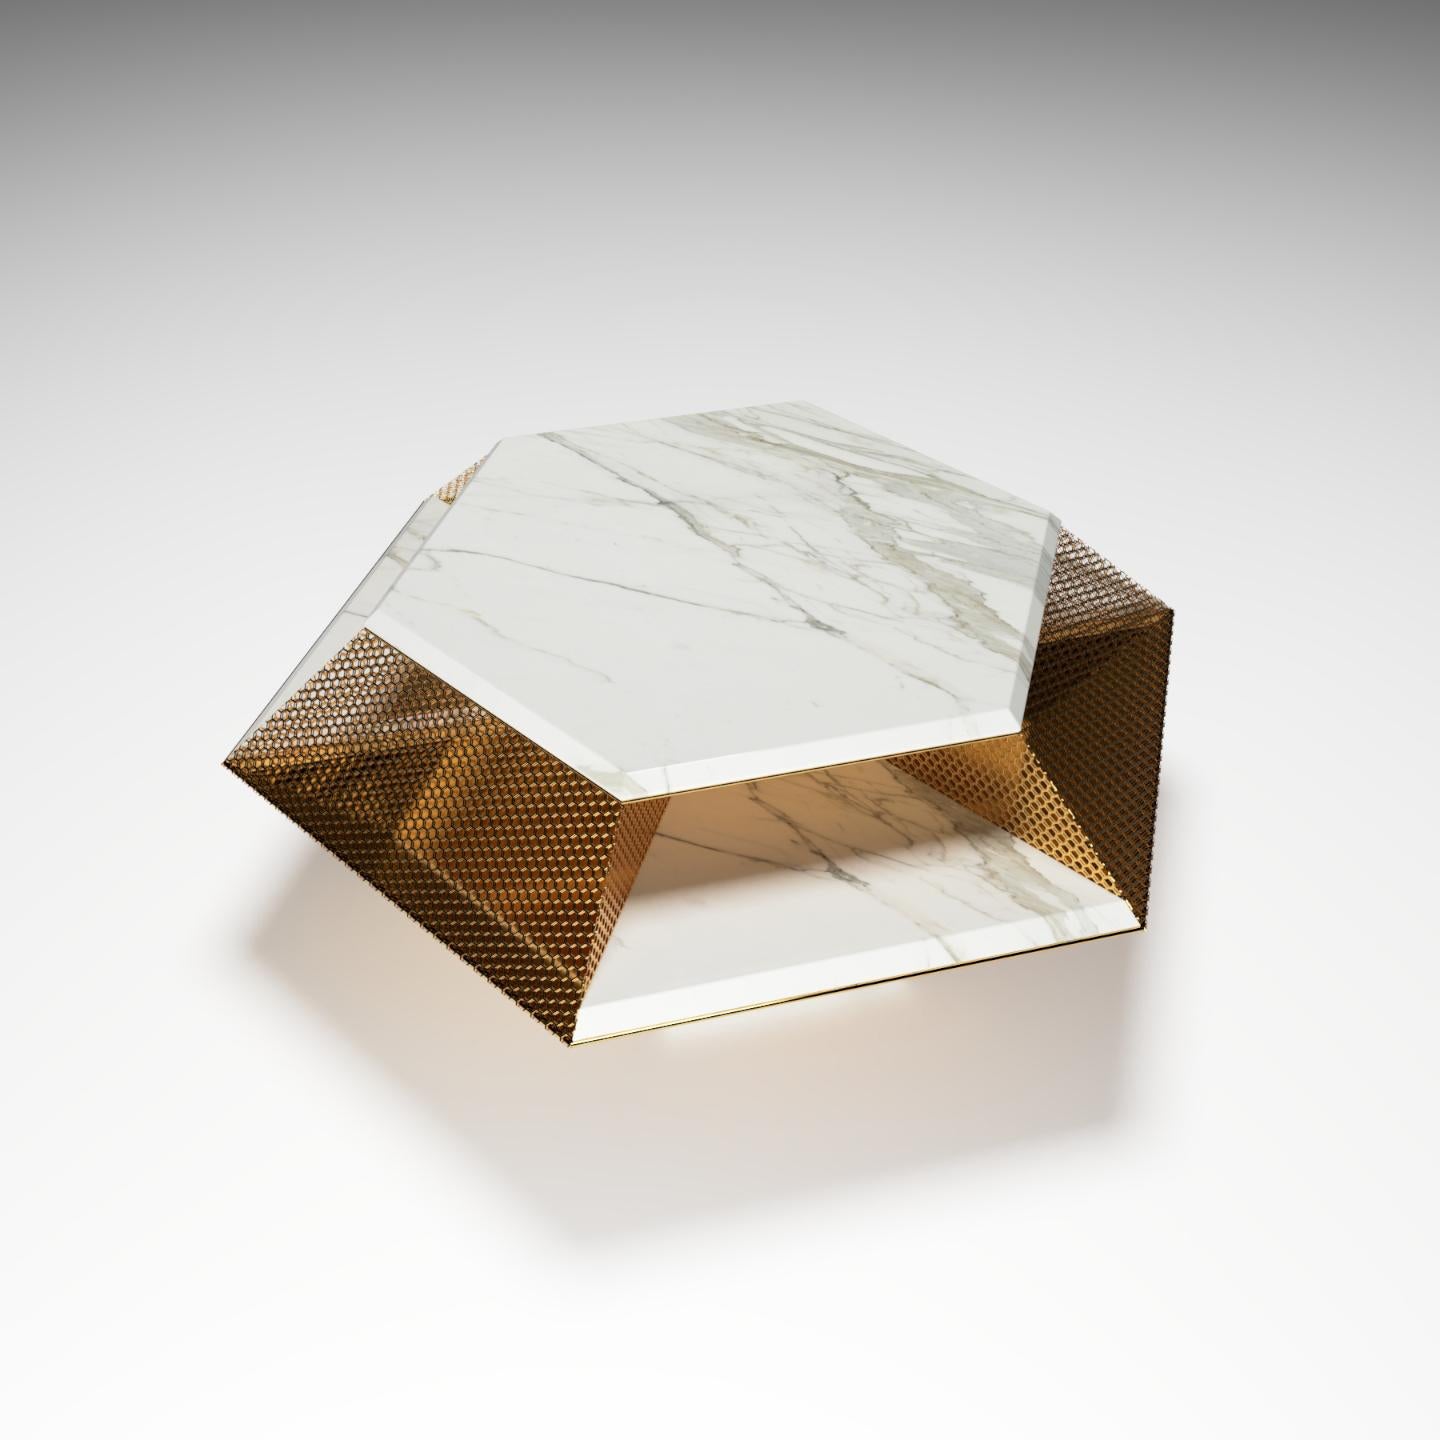 Hand-Crafted Rough Diamond Center Table, 1 of 1 by Grzegorz Majka